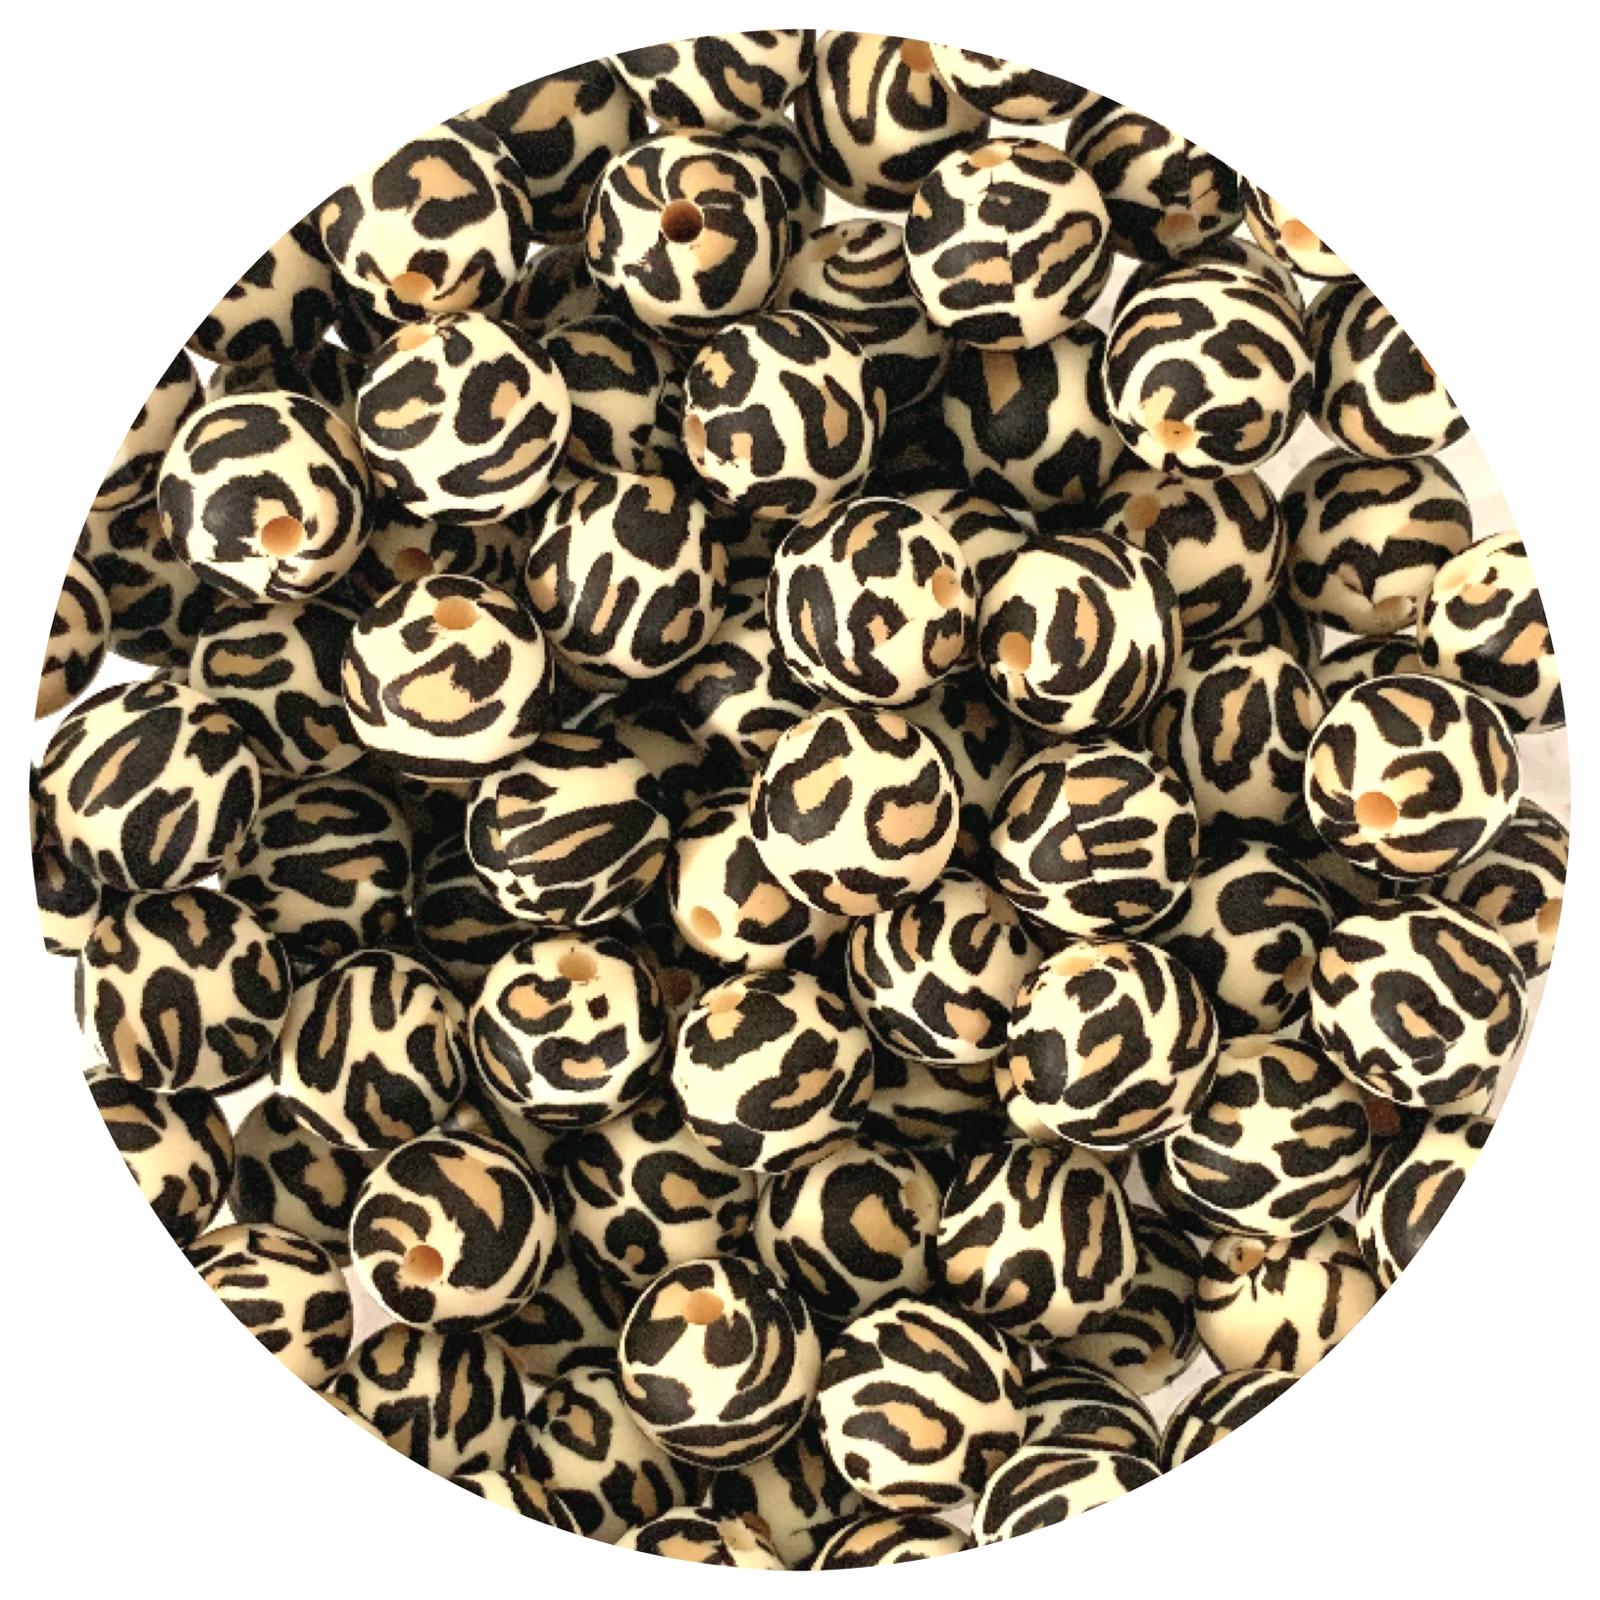 Leopard - 12mm Round Silicone Beads - 10 beads